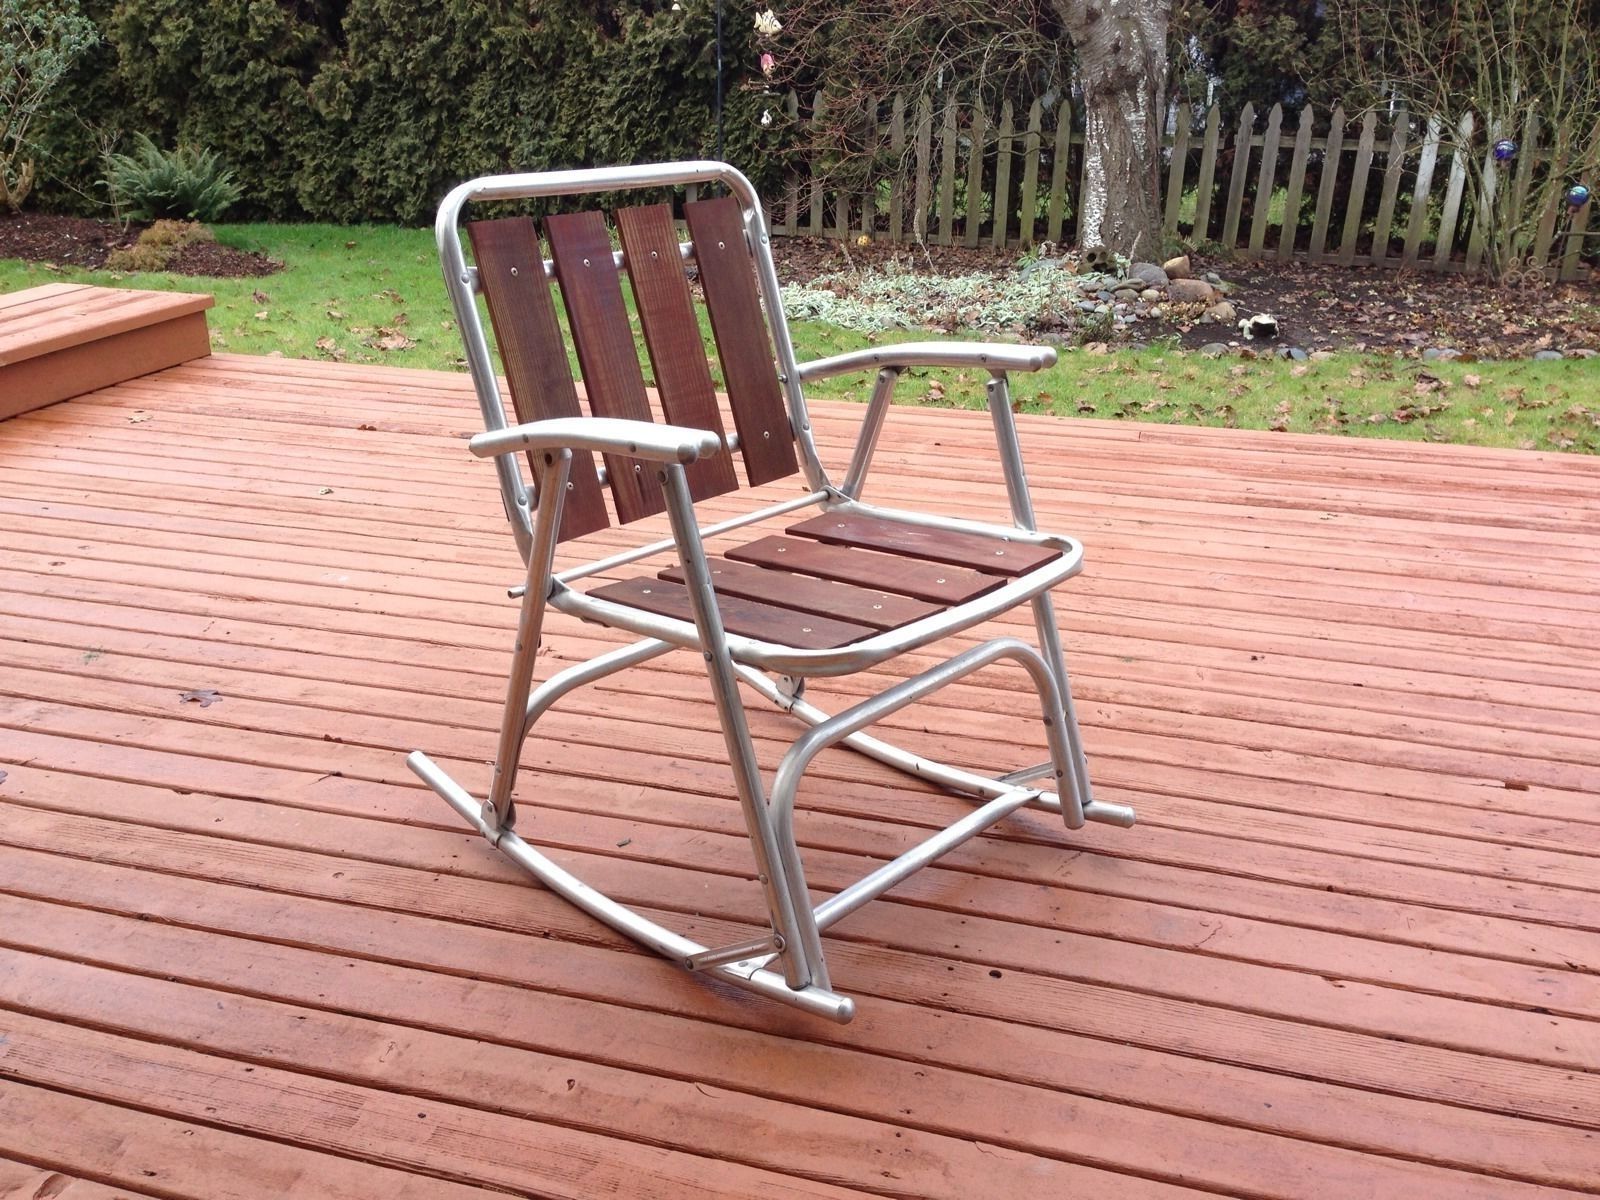 Aluminum Patio Rocking Chairs For Well Known 1 Vtg Redwood Aluminum Outdoor Patio Porch Lawn Rocking Chairs (View 13 of 15)